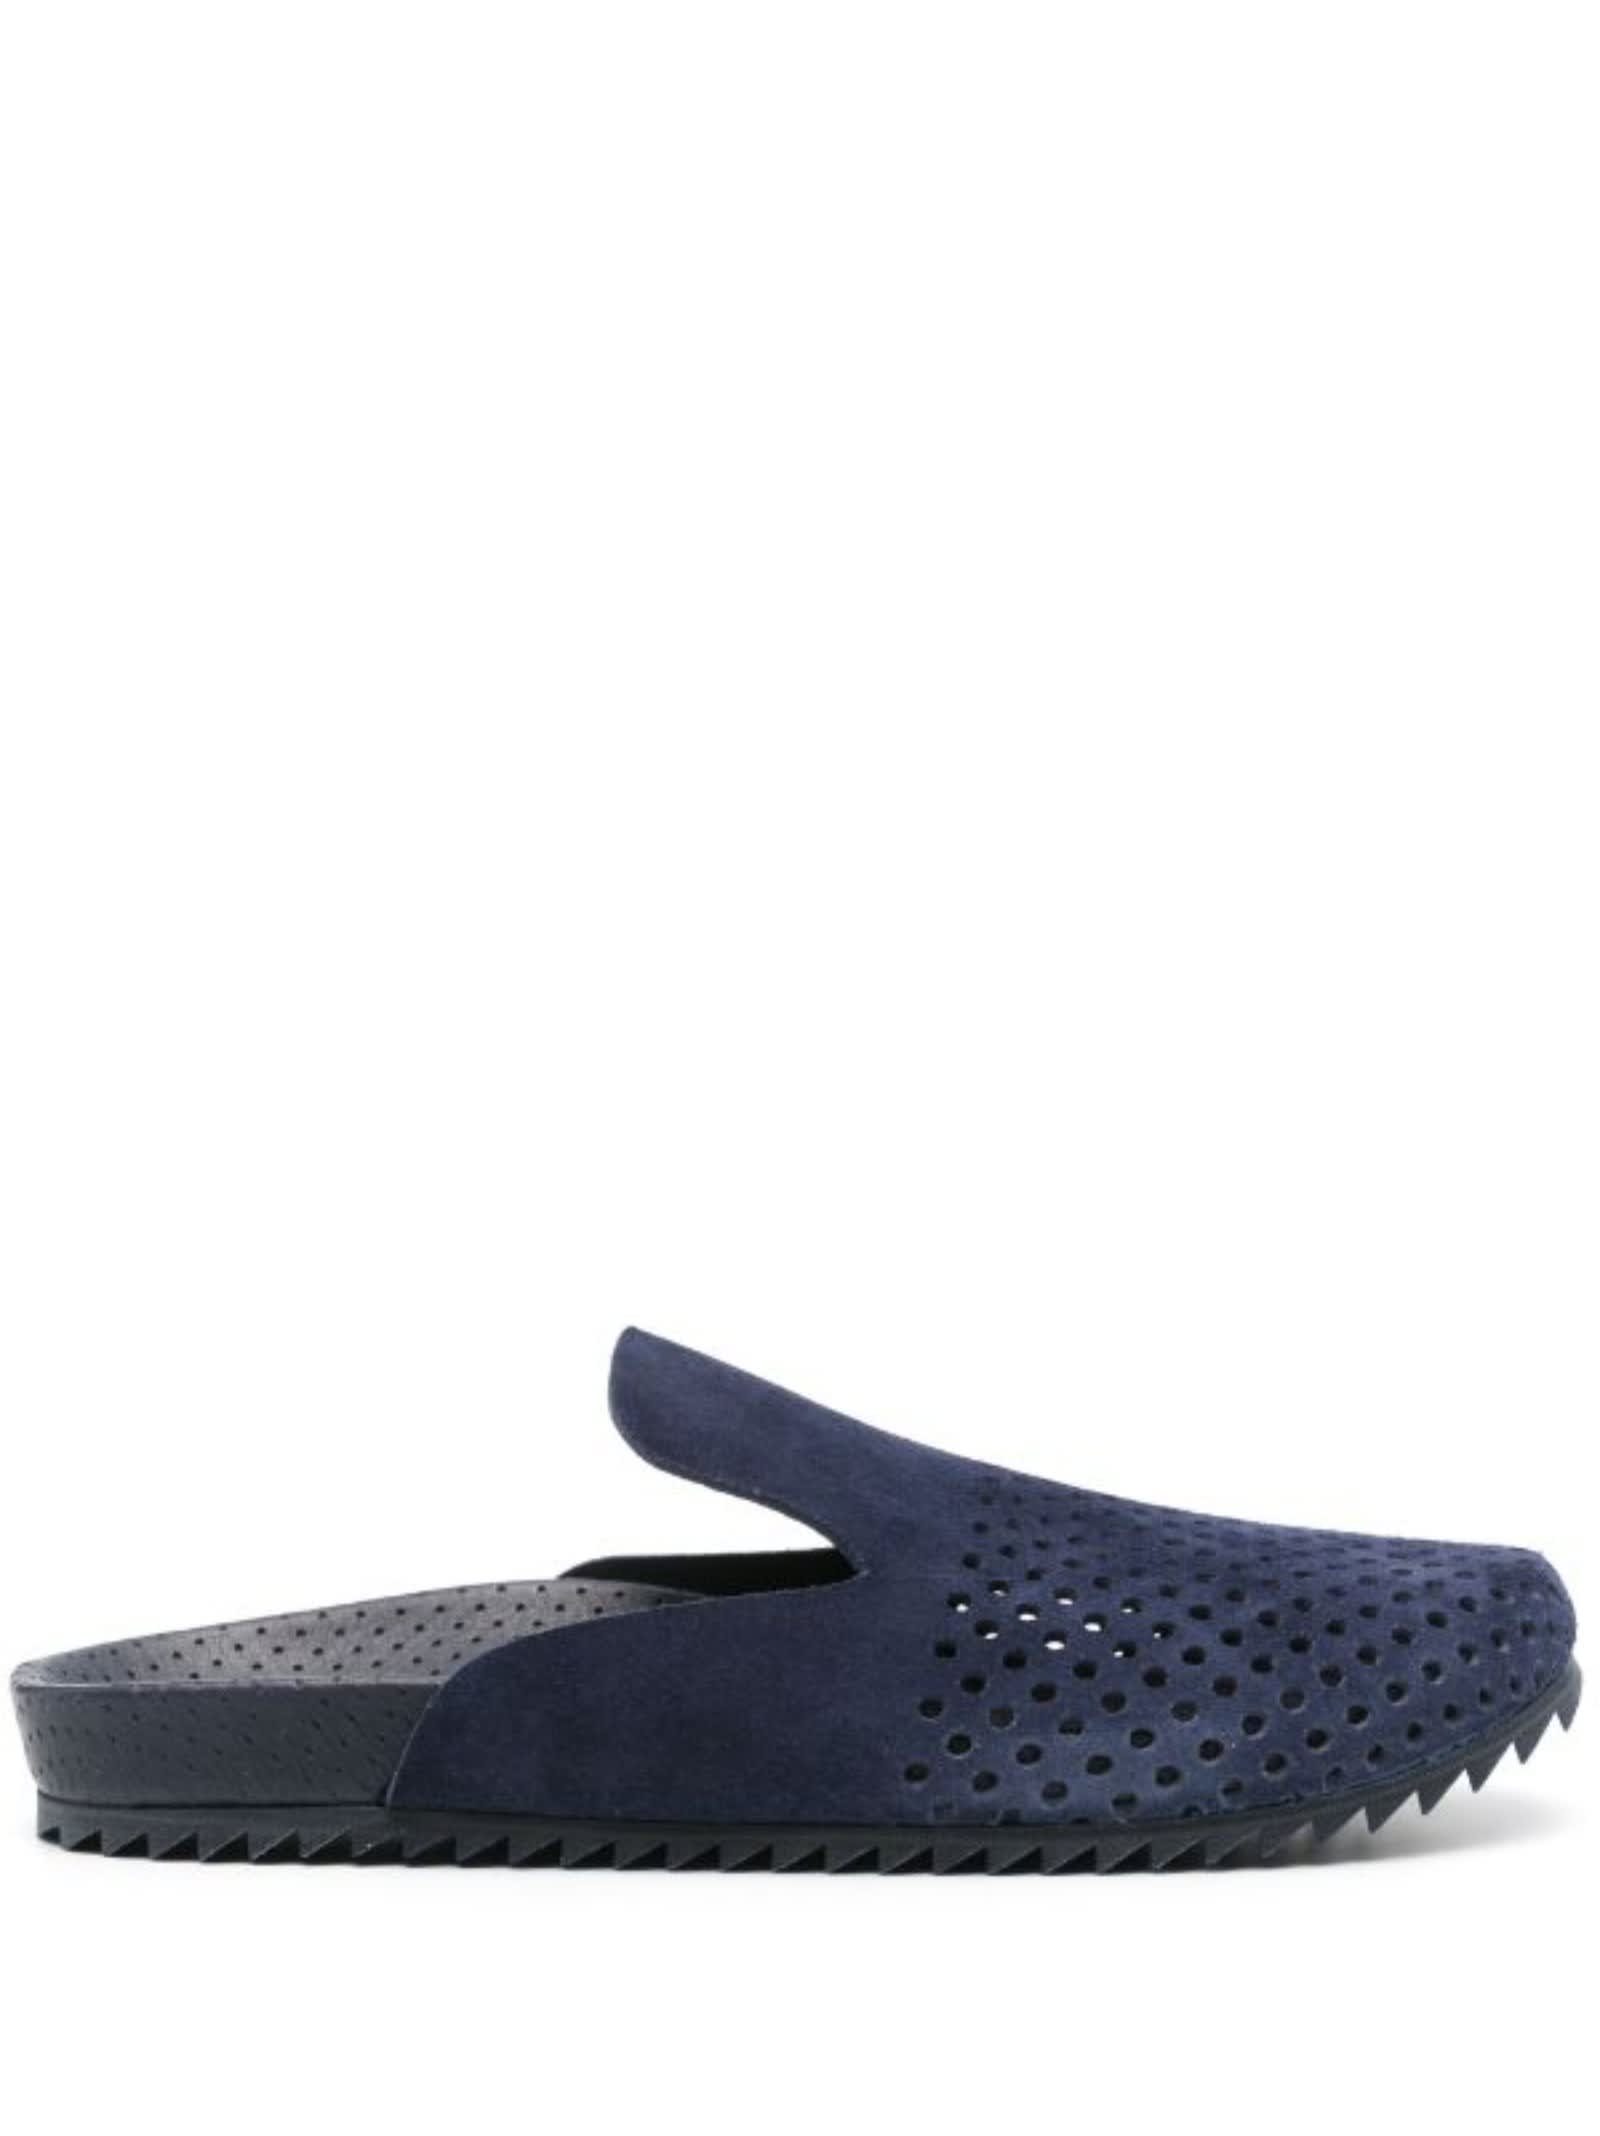 Pedro Garcia Casual Suede Slippers In Blue